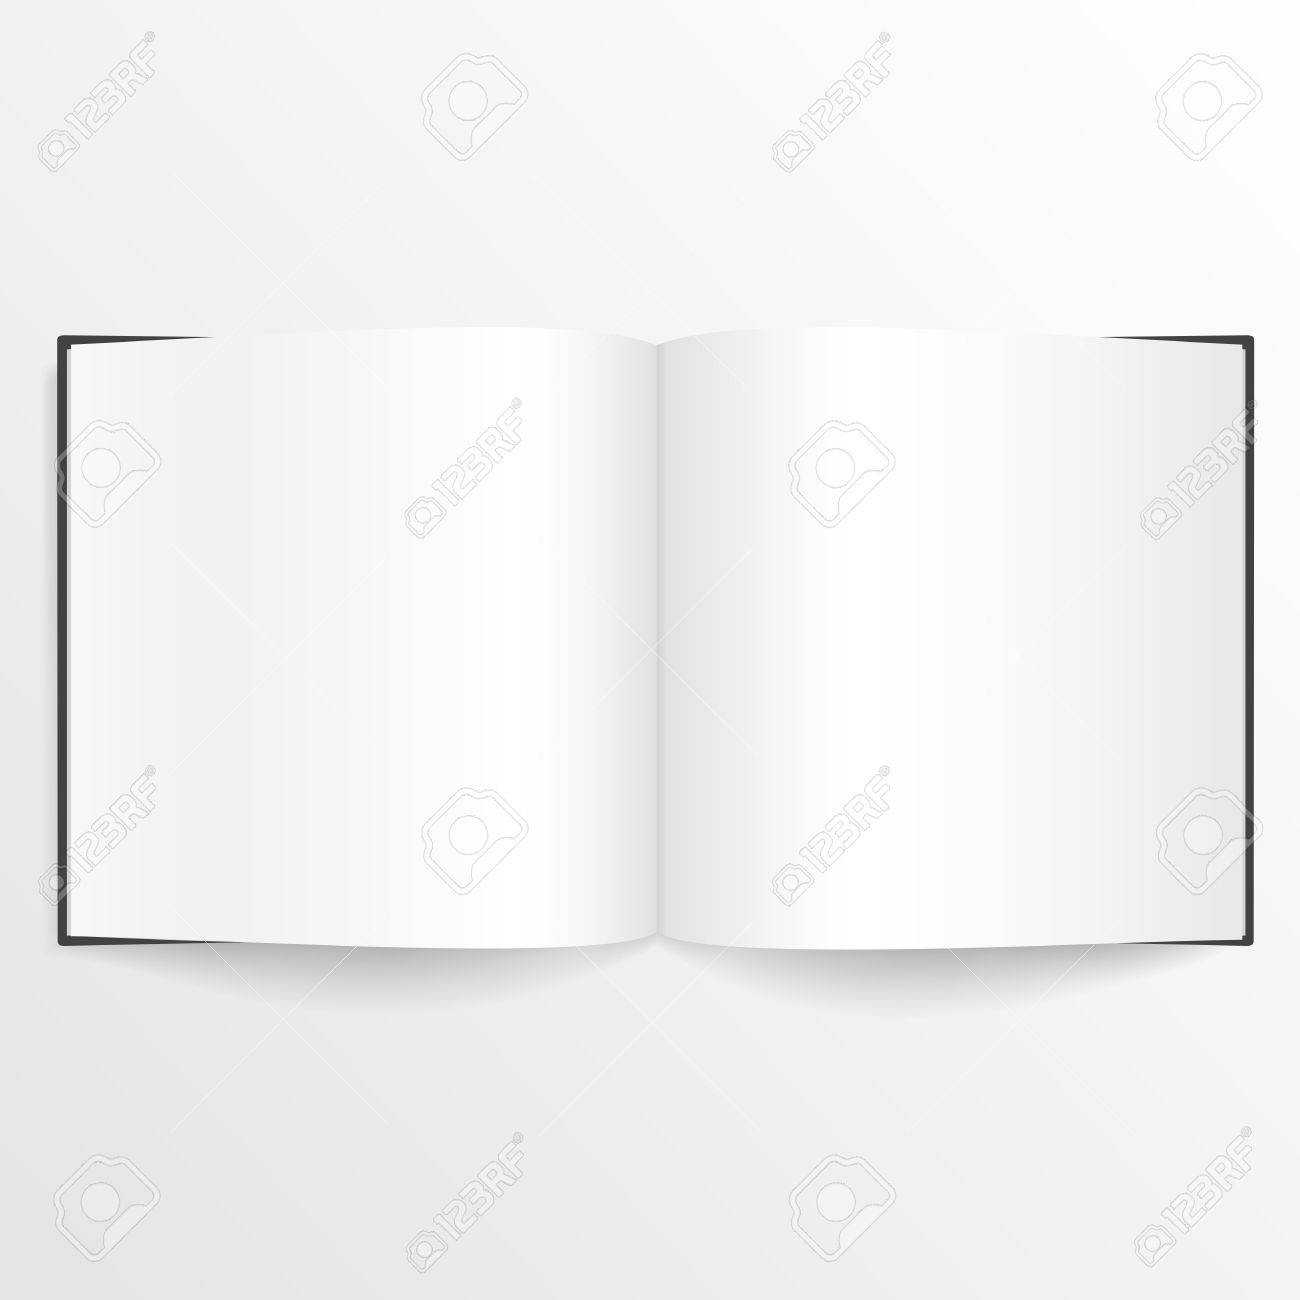 Opened Blank Book Or Magazine Spread Design Template With Cover. Inside Blank Magazine Spread Template